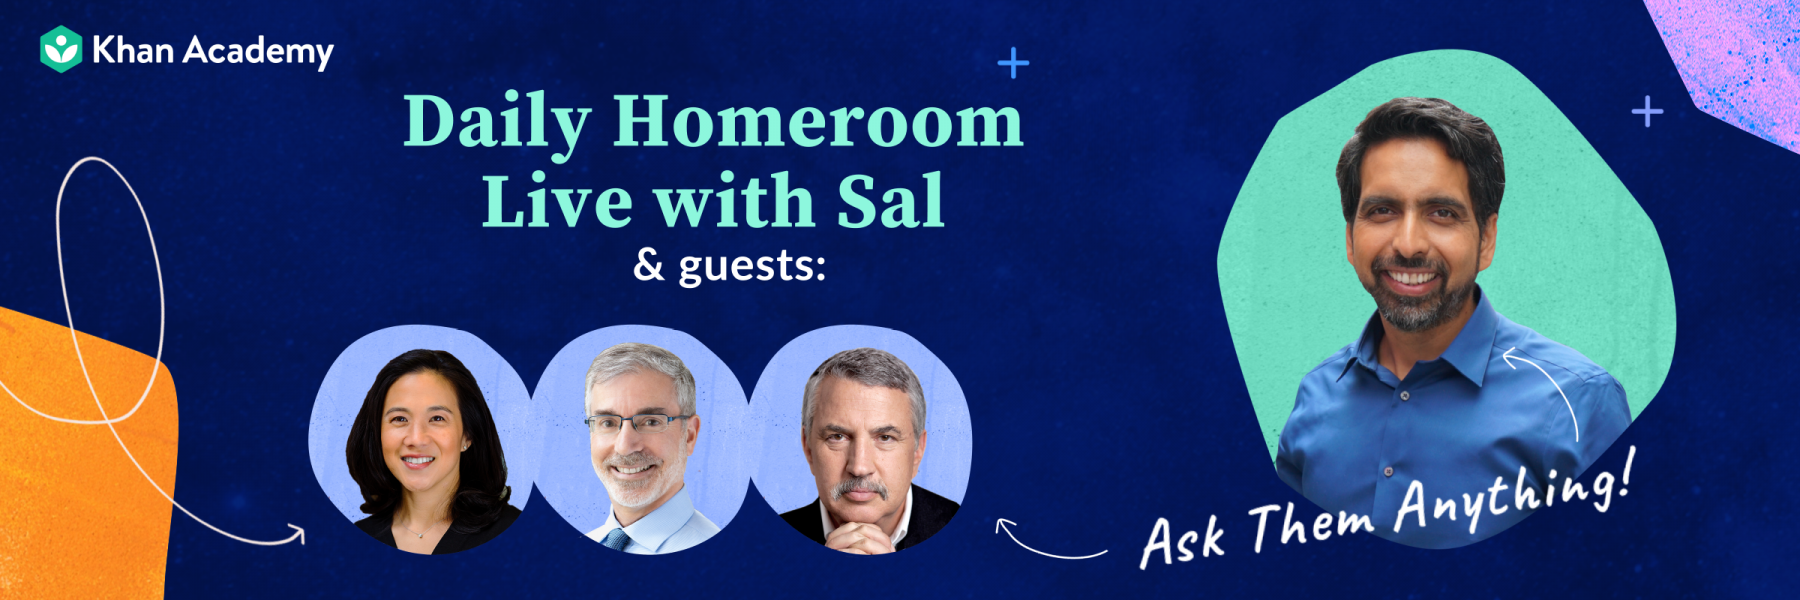 Gallery 1 - Khan Academy: Daily Homeroom Live with Sal